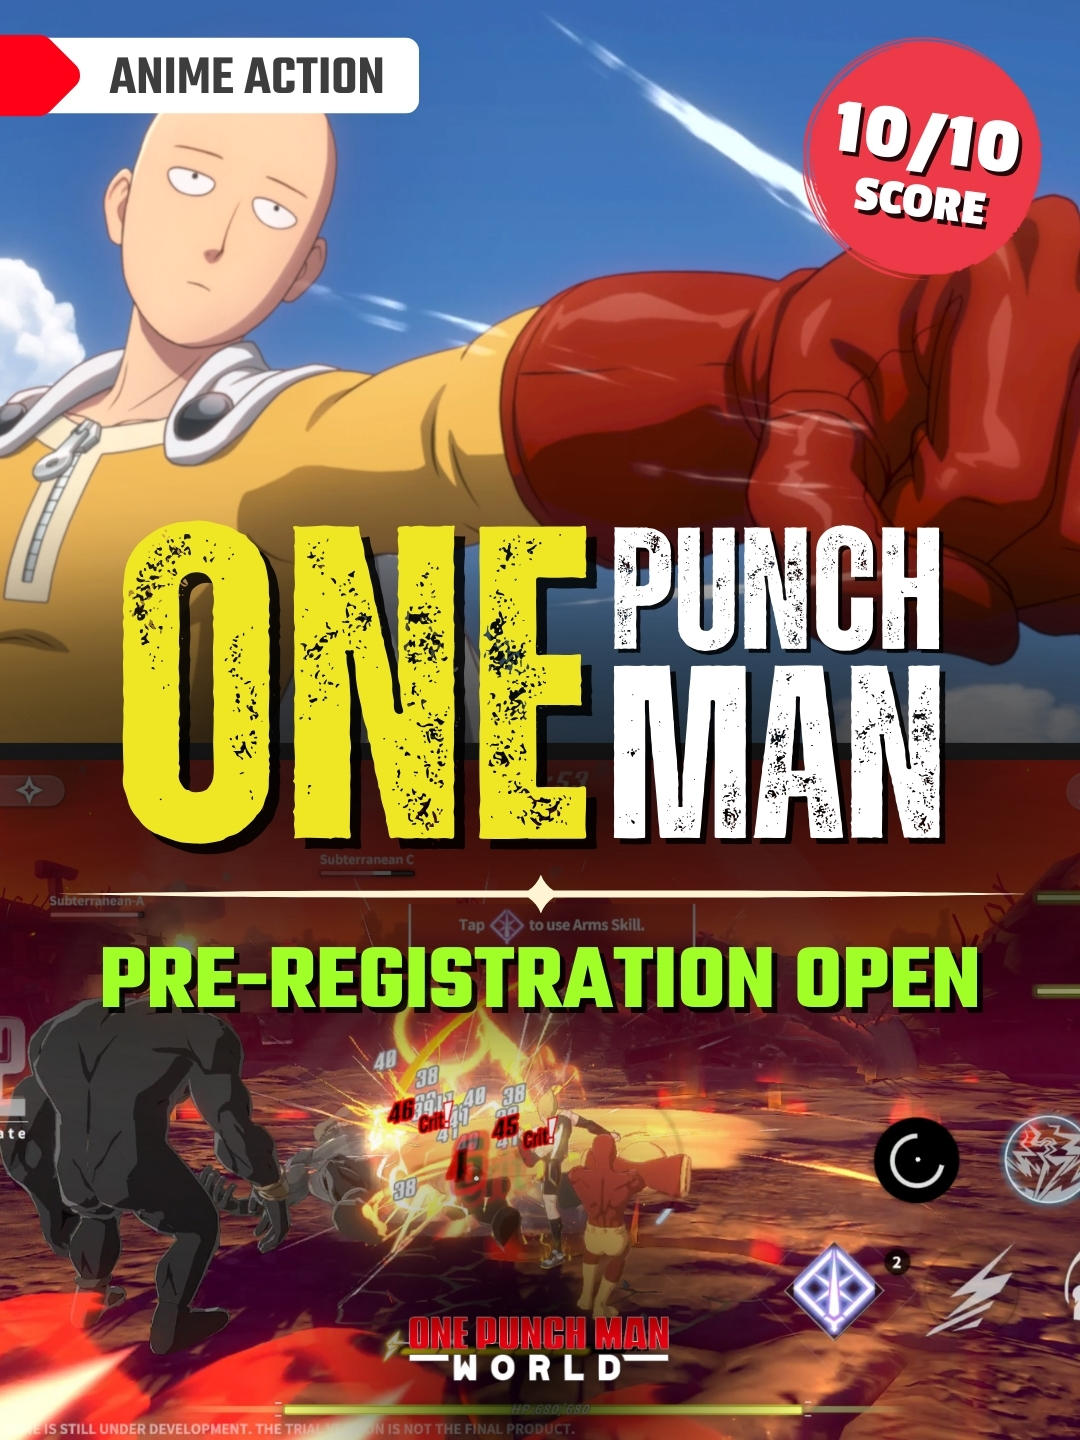 One-Punch Man: World Opens Pre-Registration for Upcoming Game